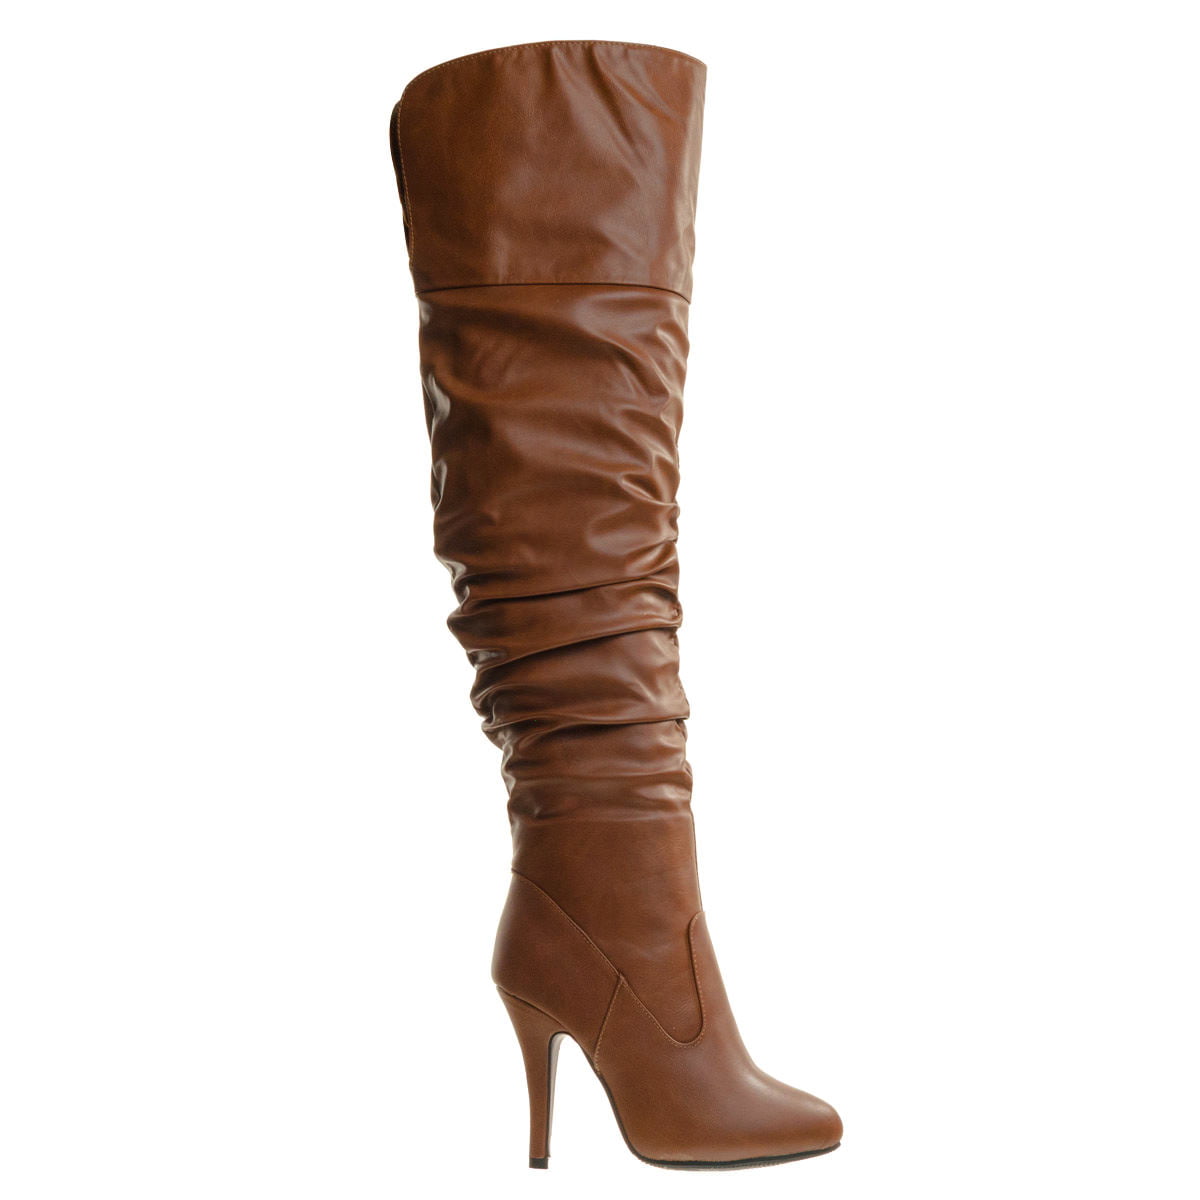 Focus33 by Forever Link, High heel Wrinkled Slouchy Dress Boots ...